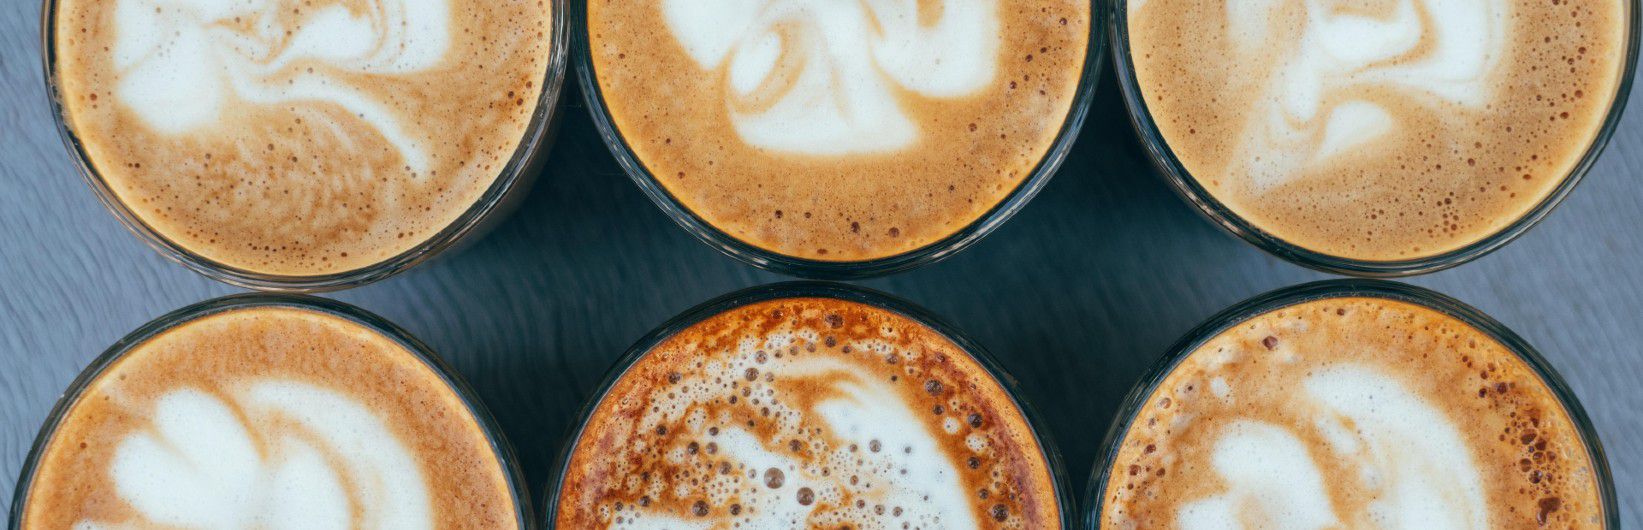 New Data Reveals America’s Most Popular Types of Coffee